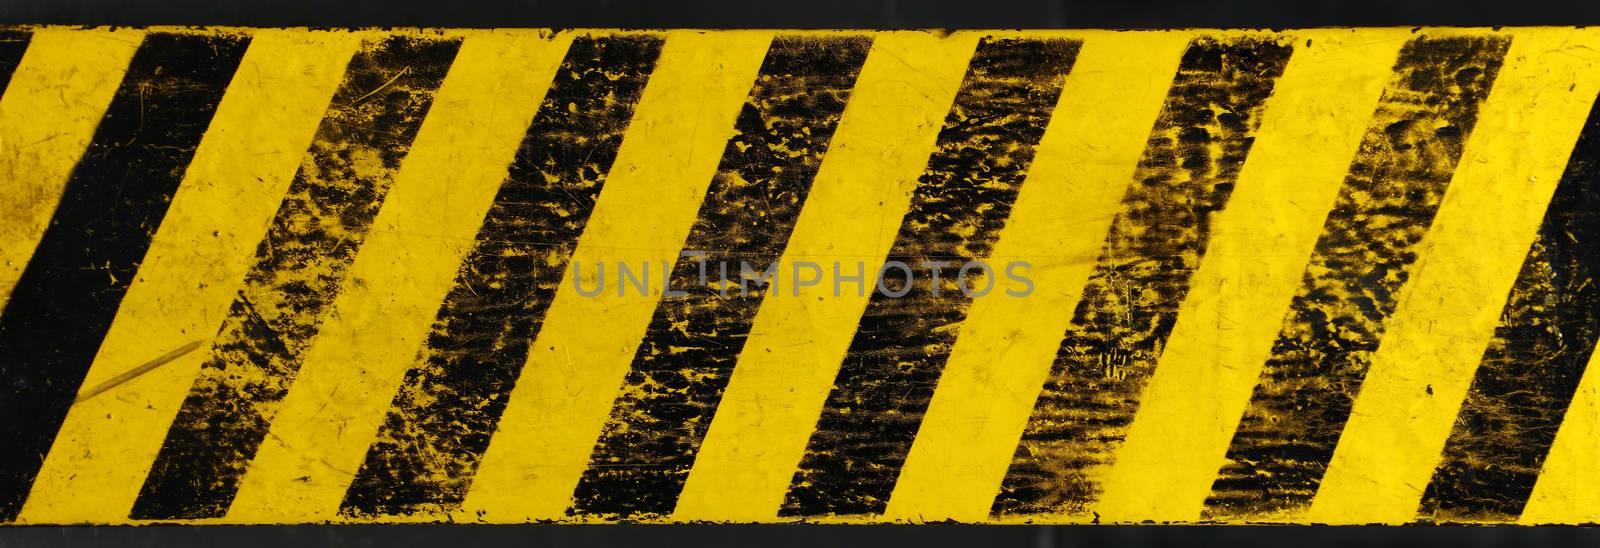 Old yellow weathered painted background with grunge black hazard sign stripes over dark